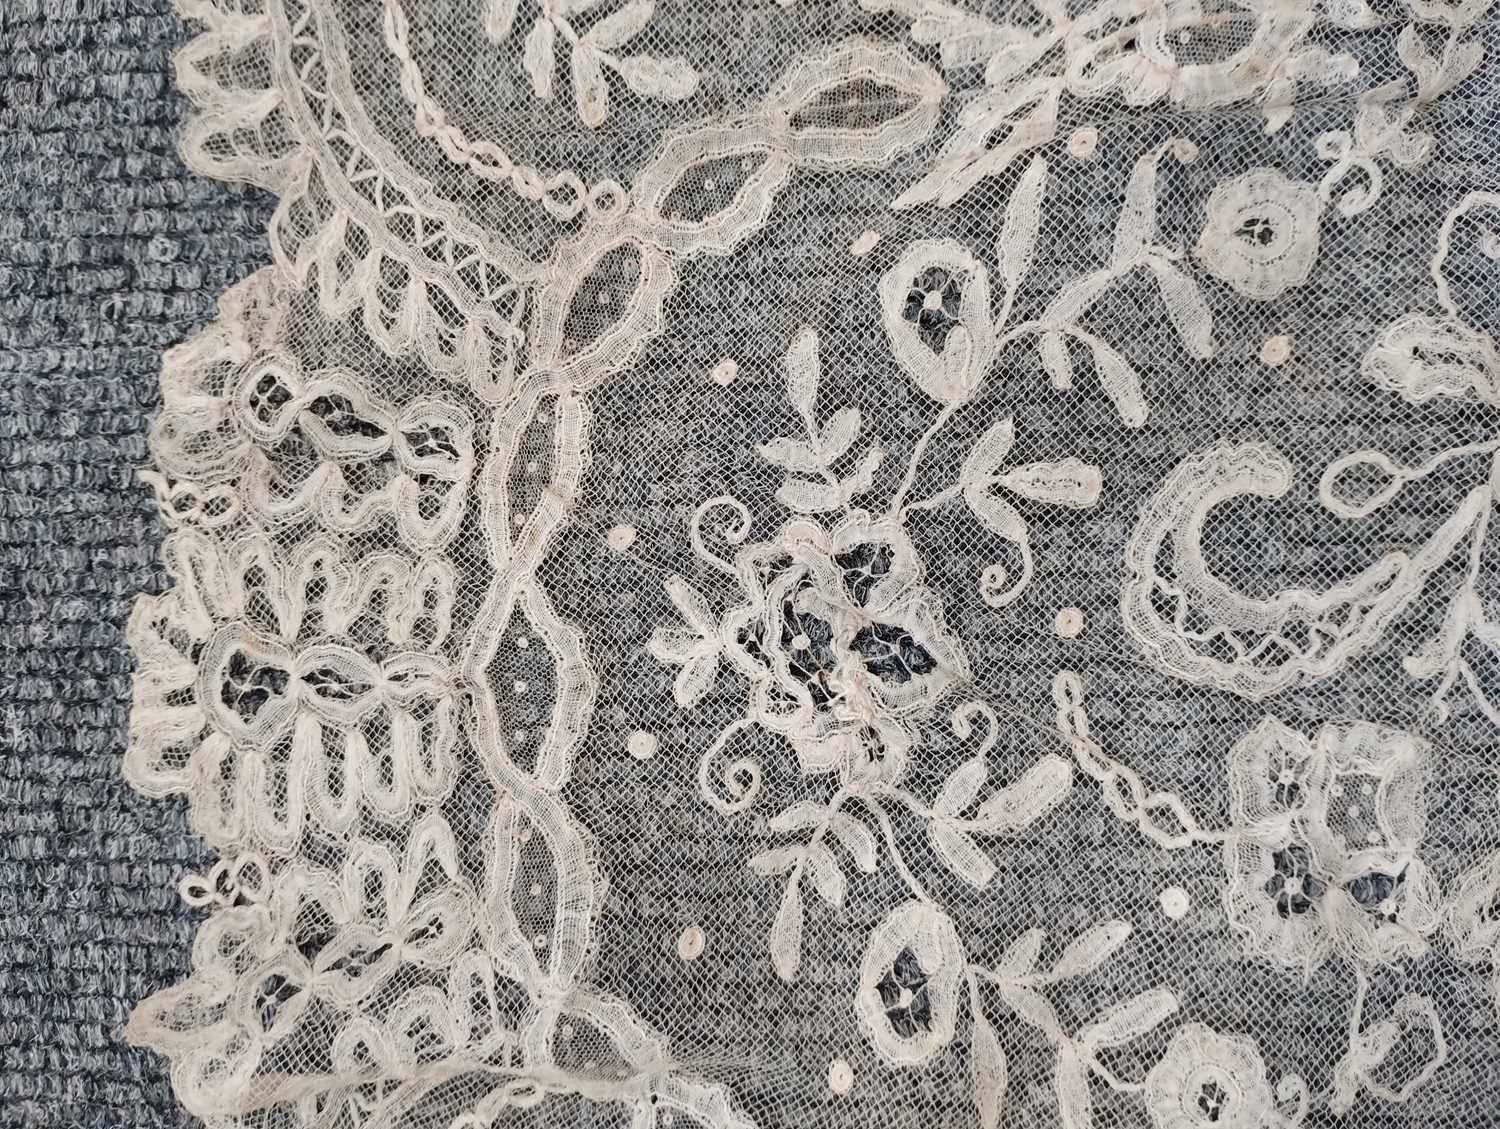 Early 20th Century Lace comprising a flounce with appliquéd flower heads and motifs within a - Image 30 of 32